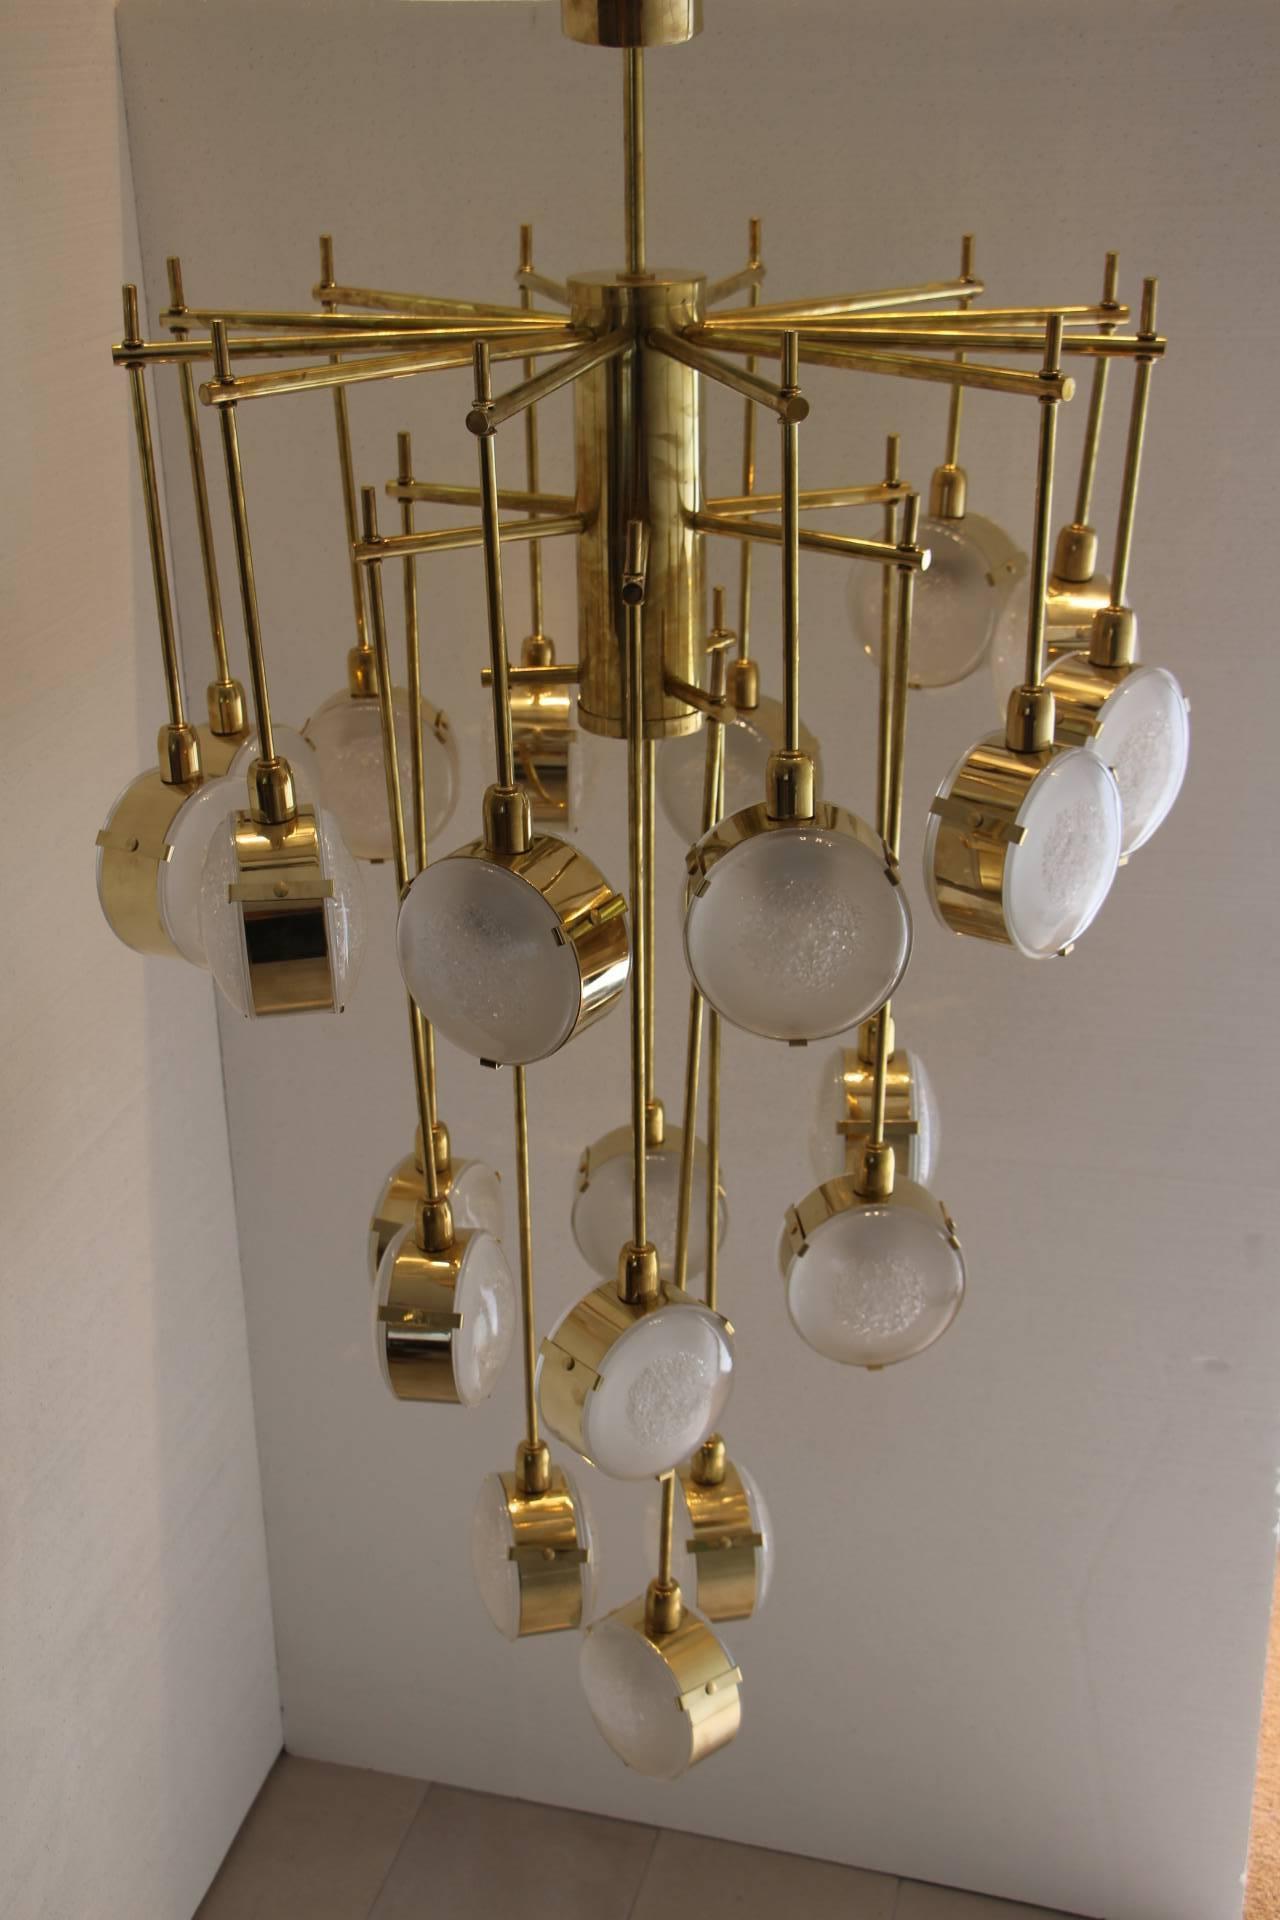 This chandelier features twenty-one lights. It is very unusual shape.
Each vertical rod is finished by a double sided glass lentil circled in brass ring. 
Every piece of glass has quartz inclusions, which make many reflects inside the glass .It is